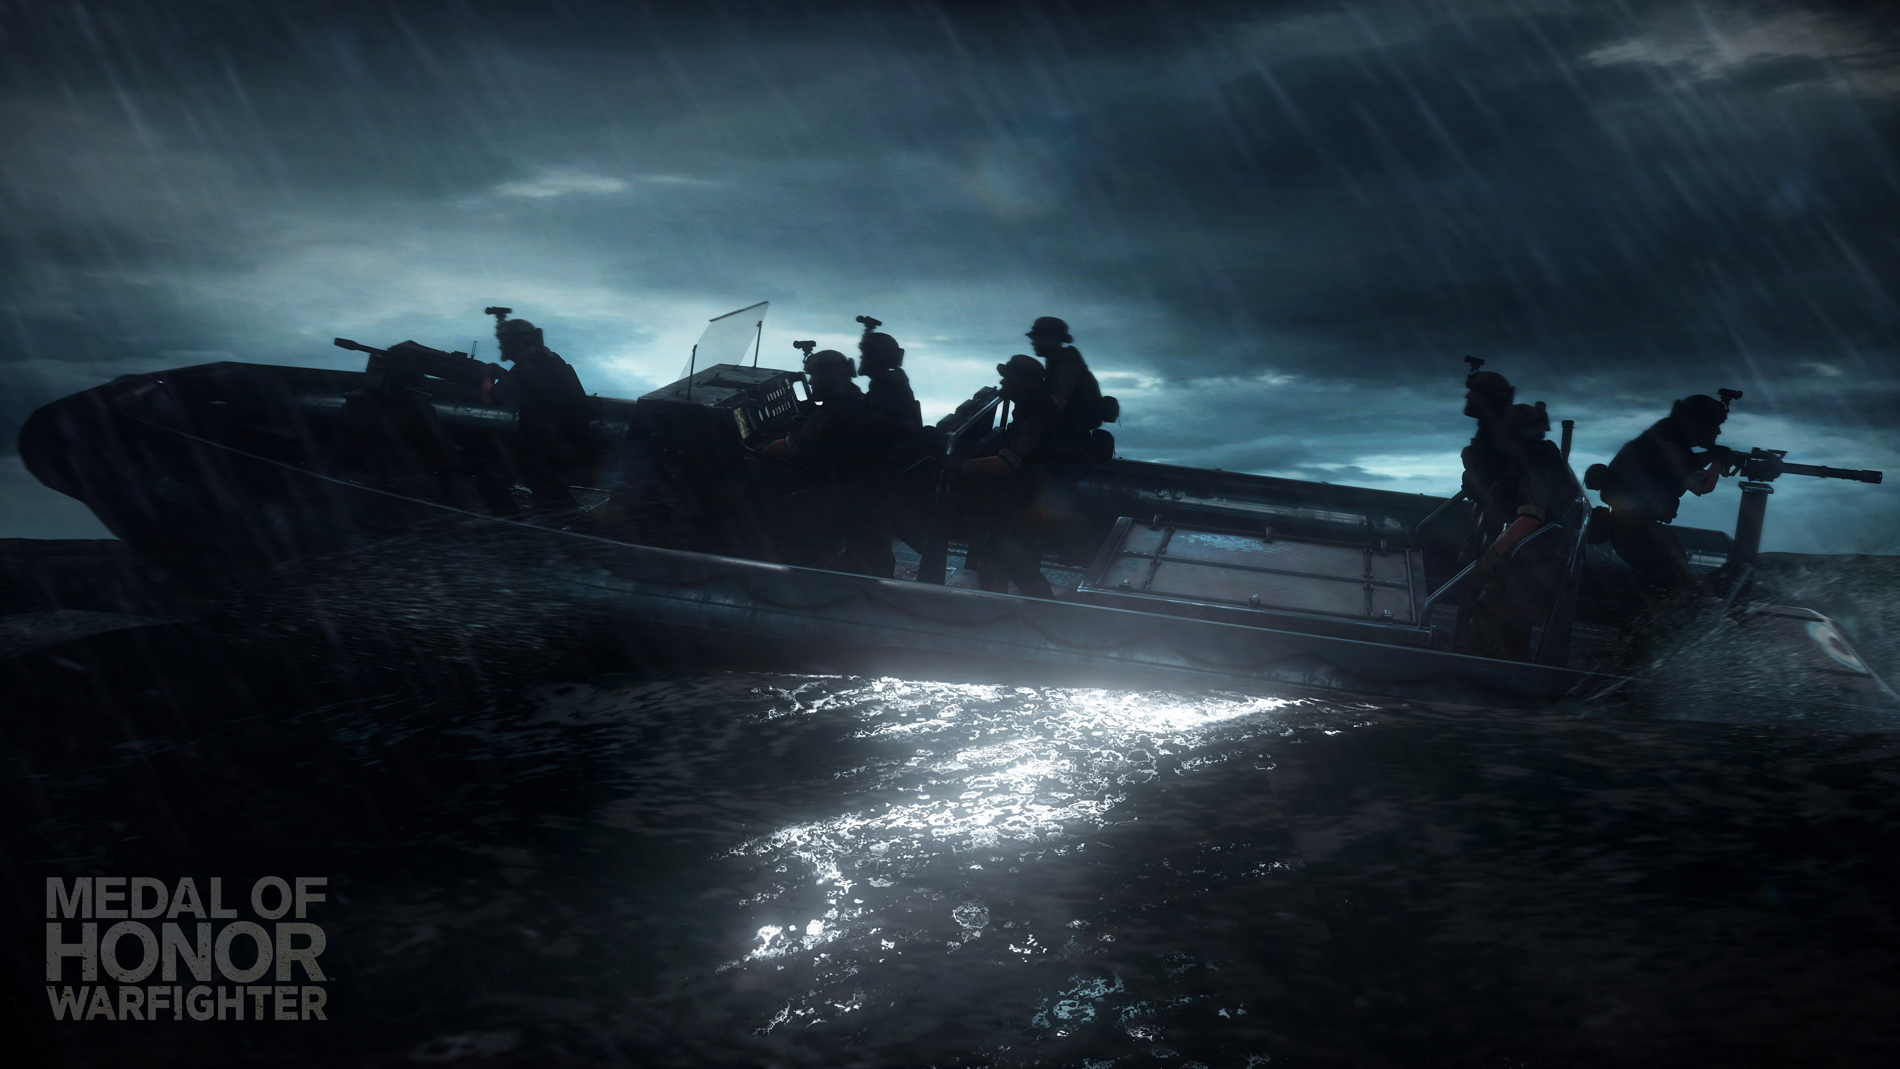 HD Wallpaper From Ea S Uping Game Medal Of Honor Warfighter